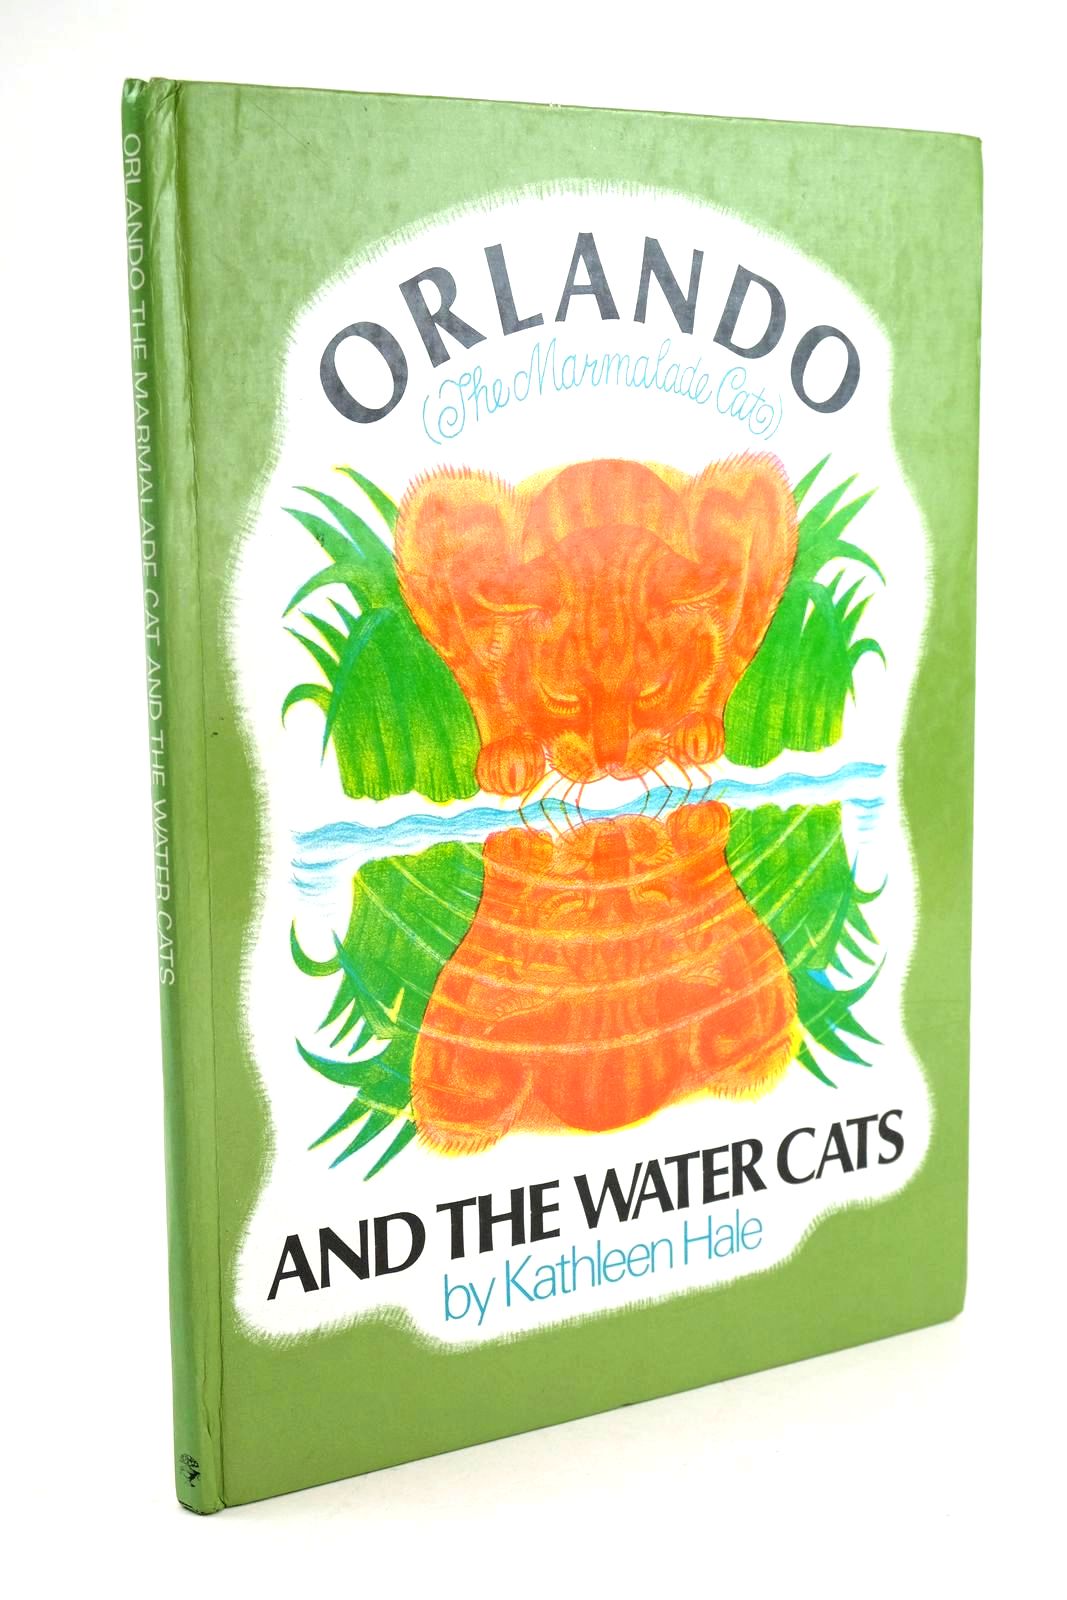 Photo of ORLANDO (THE MARMALADE CAT) AND THE WATER CATS written by Hale, Kathleen illustrated by Hale, Kathleen published by Jonathan Cape (STOCK CODE: 1324080)  for sale by Stella & Rose's Books